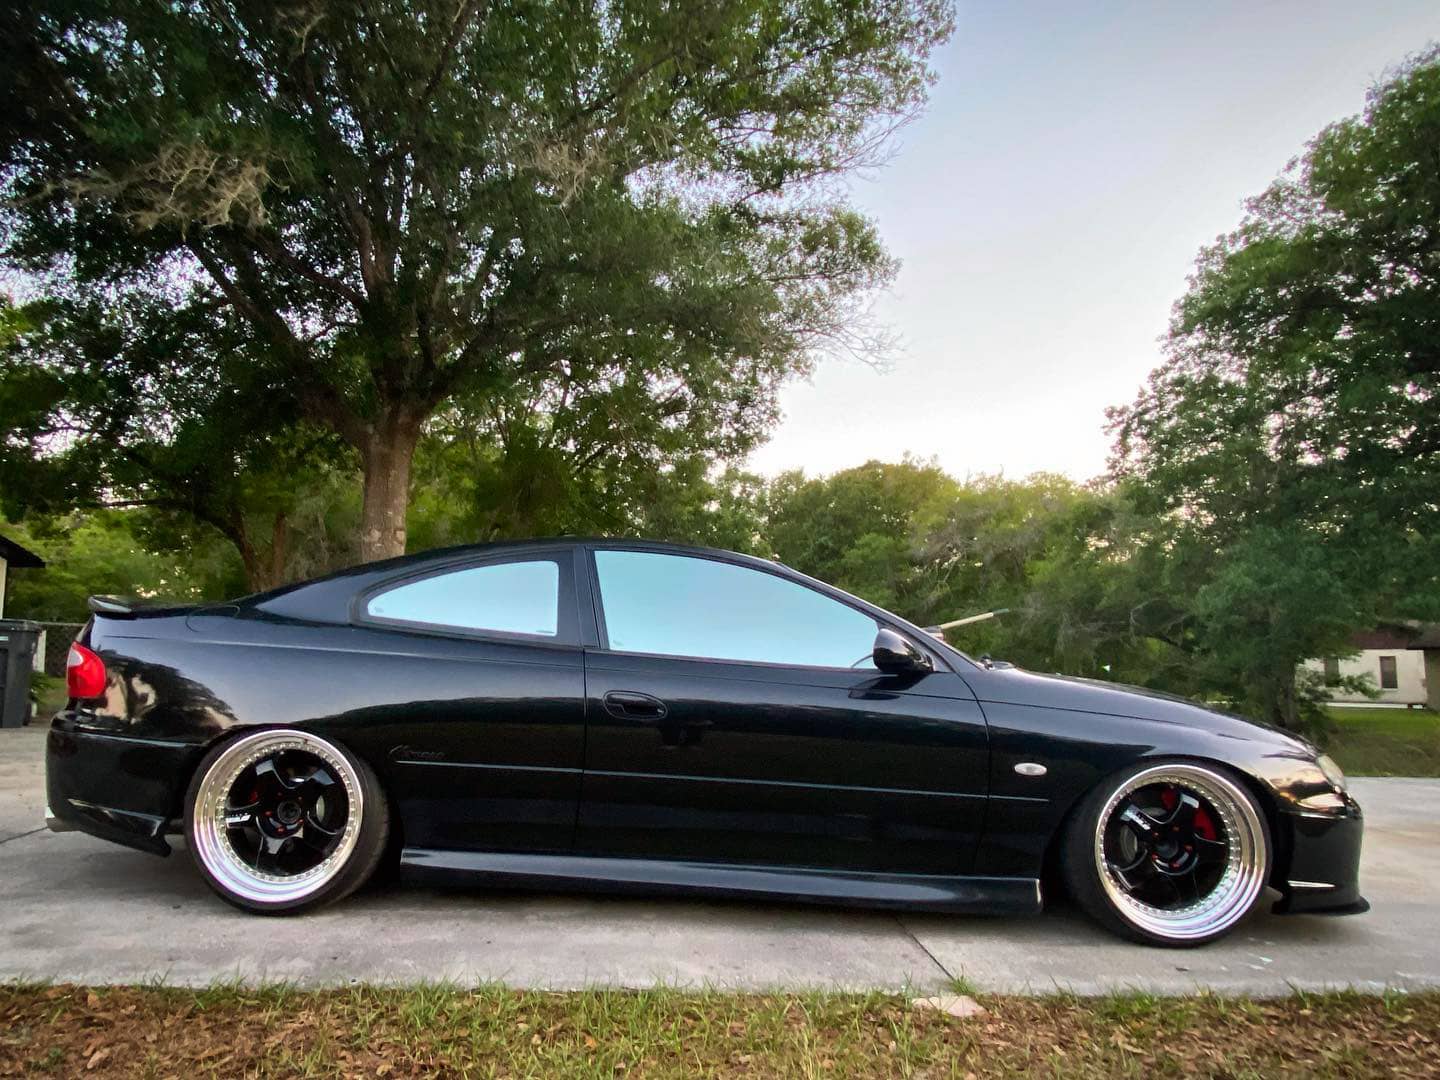 Slammed Pontiac G8 on BC Racing BR Extreme Low coilovers